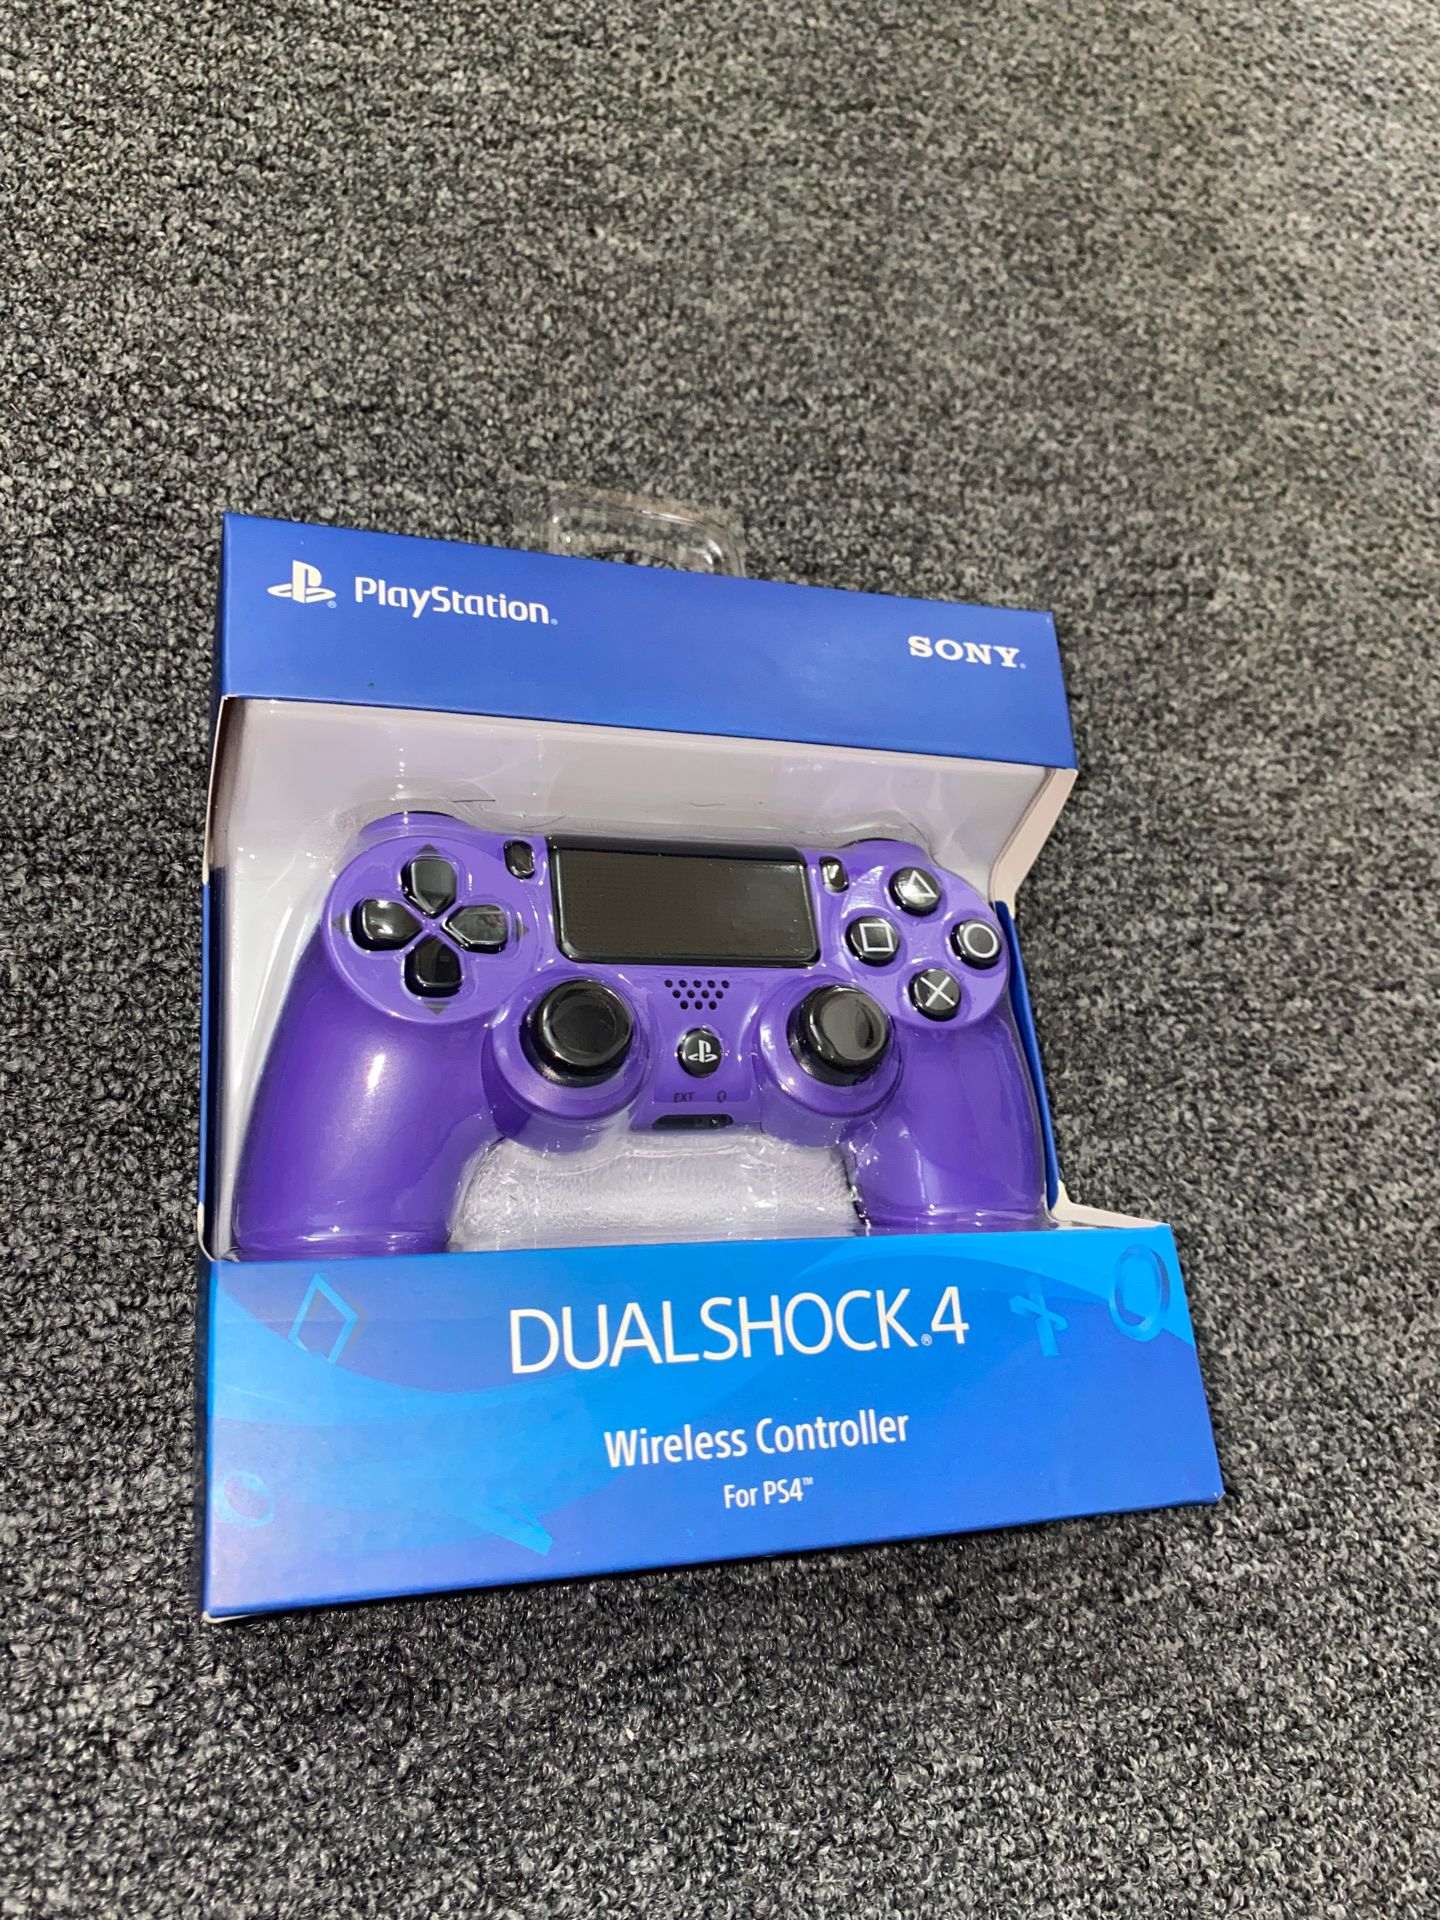 ⚠️ NEW PS4 ELECTRIC PURPLE CONTROLLER $55 FIRM ⚠️